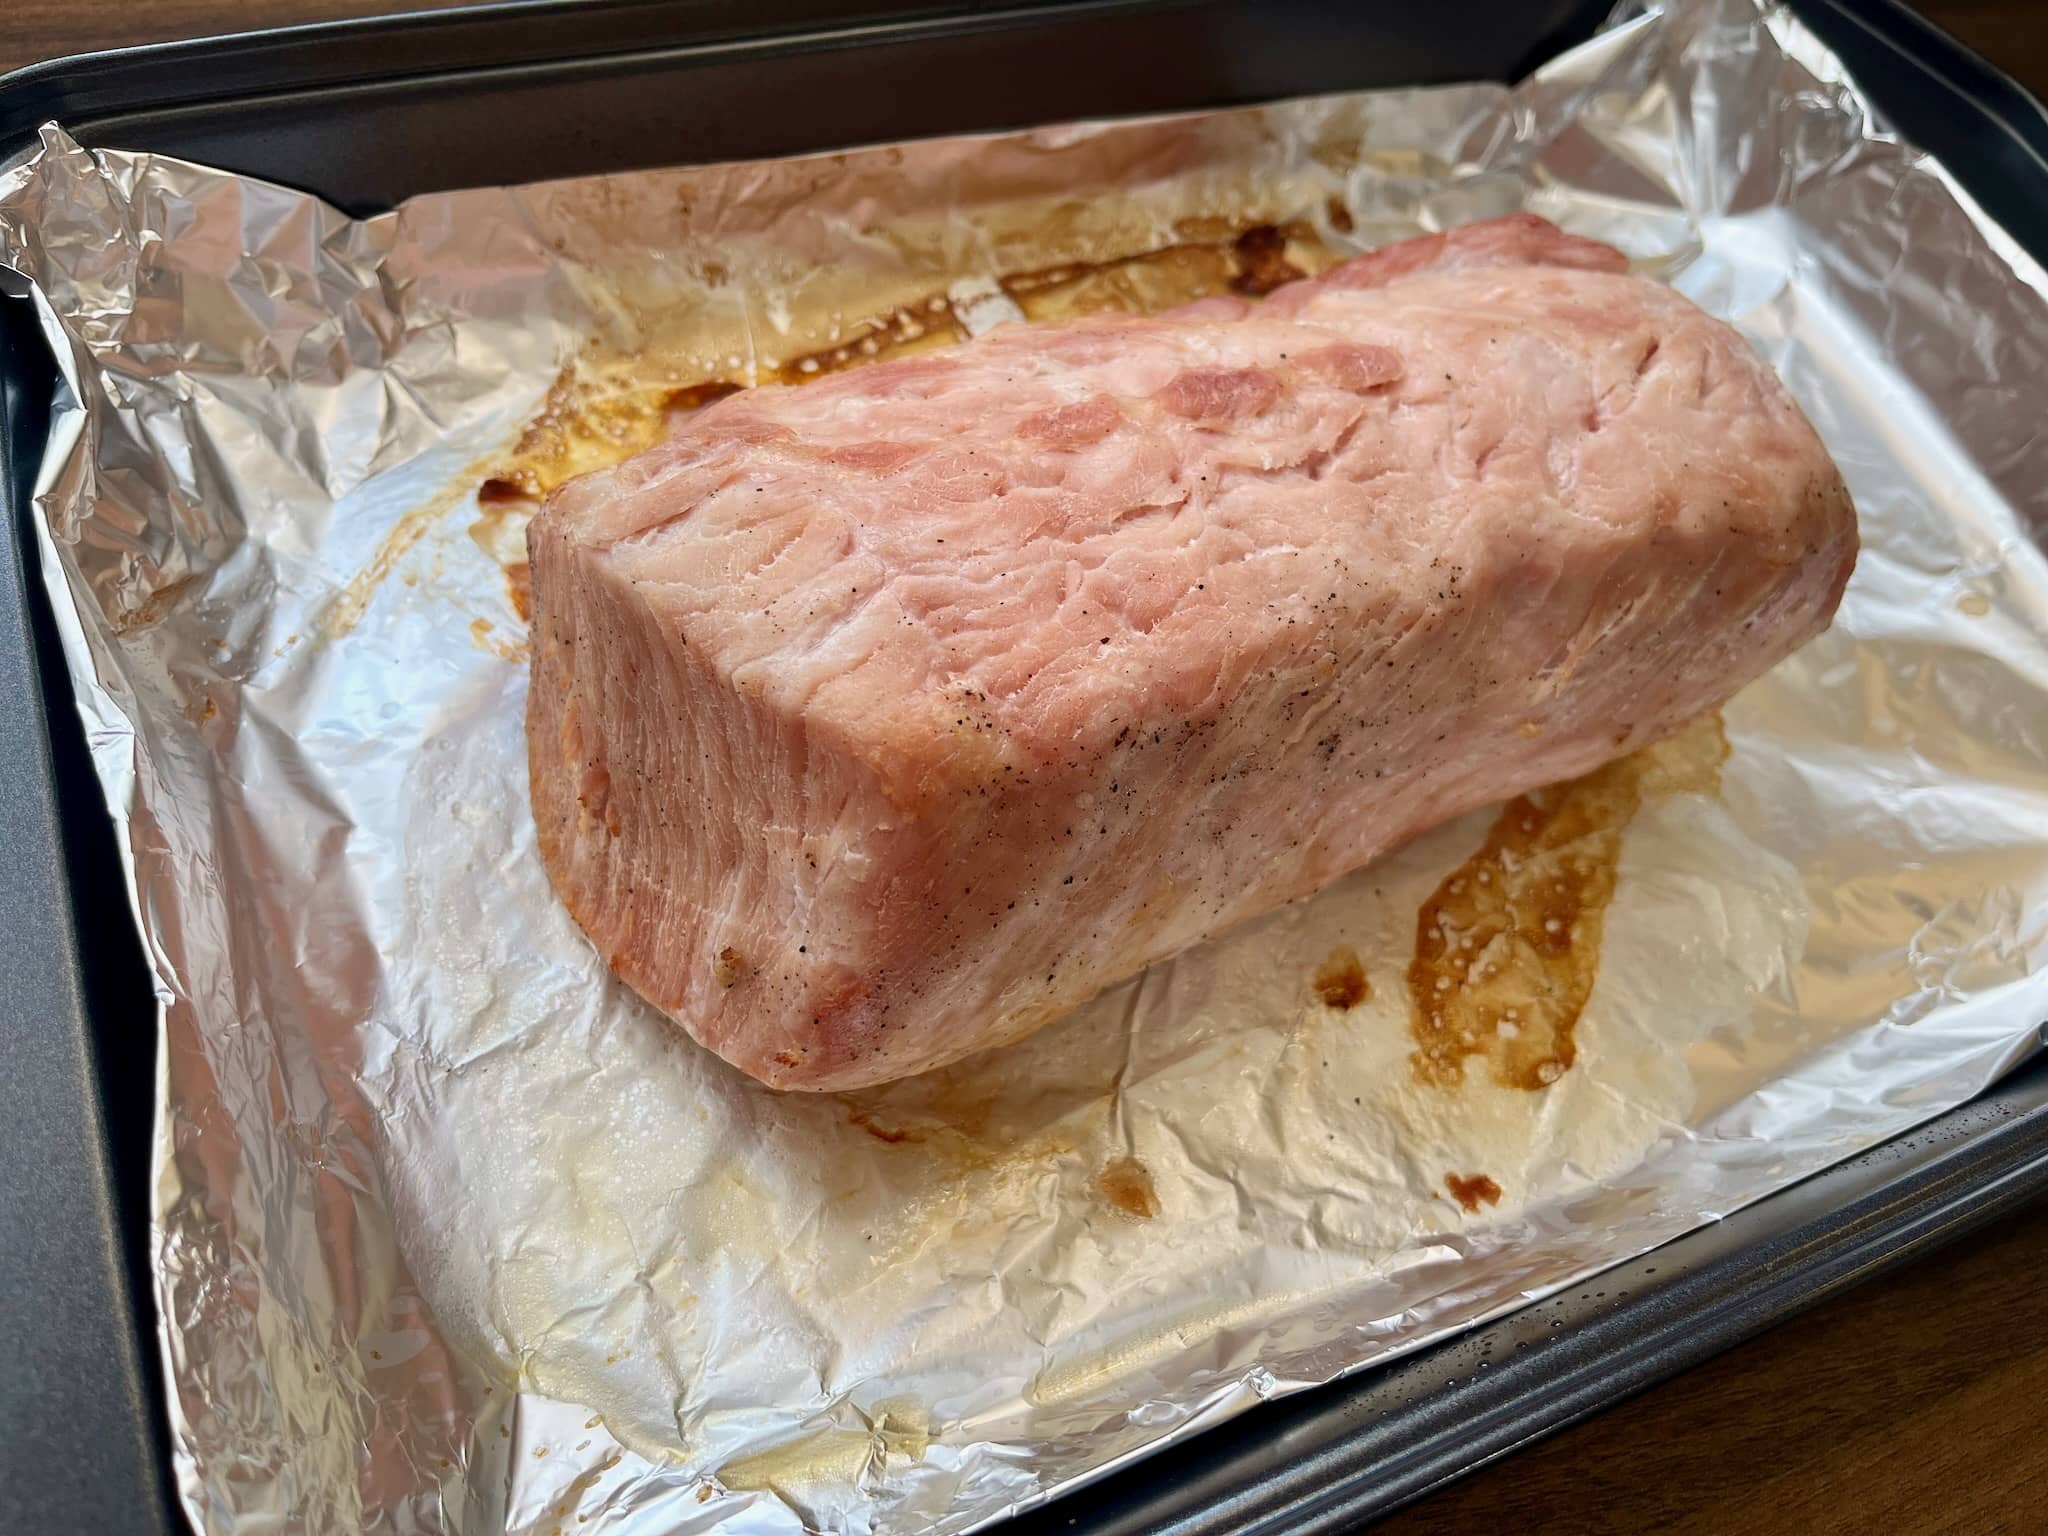 Marinated pork loin on a lined baking tray after final baking